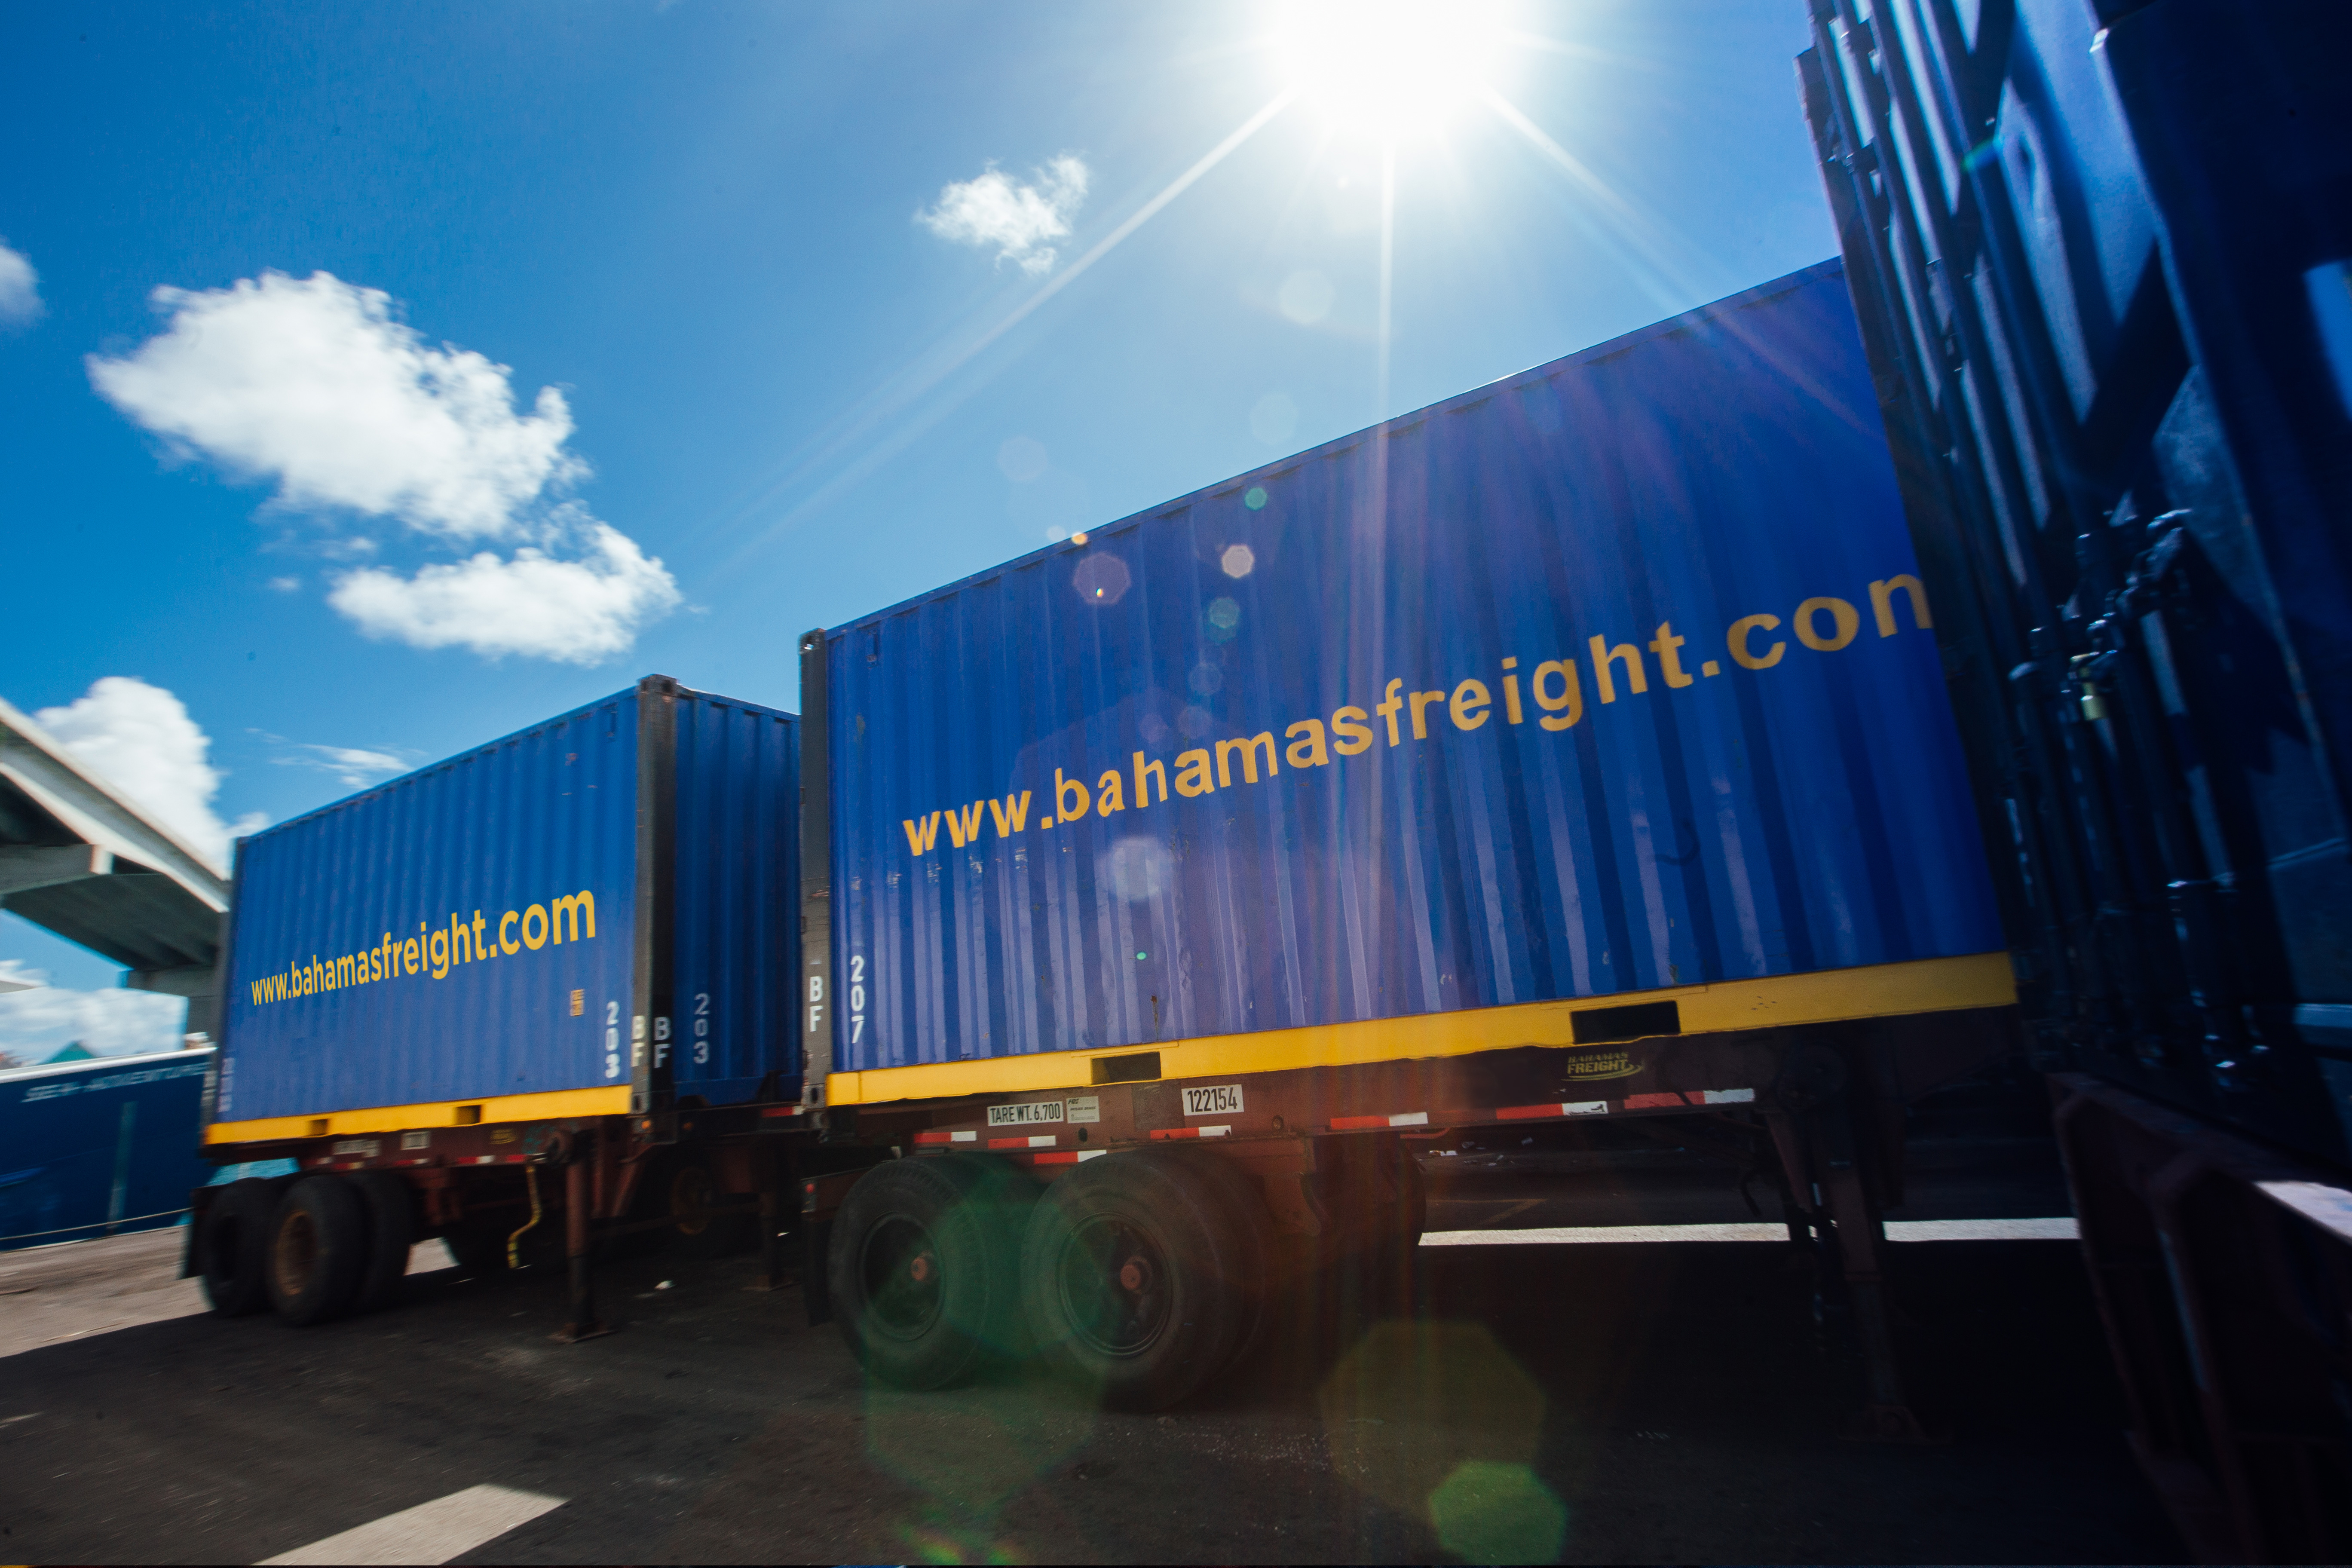 Bahamas Freight containers